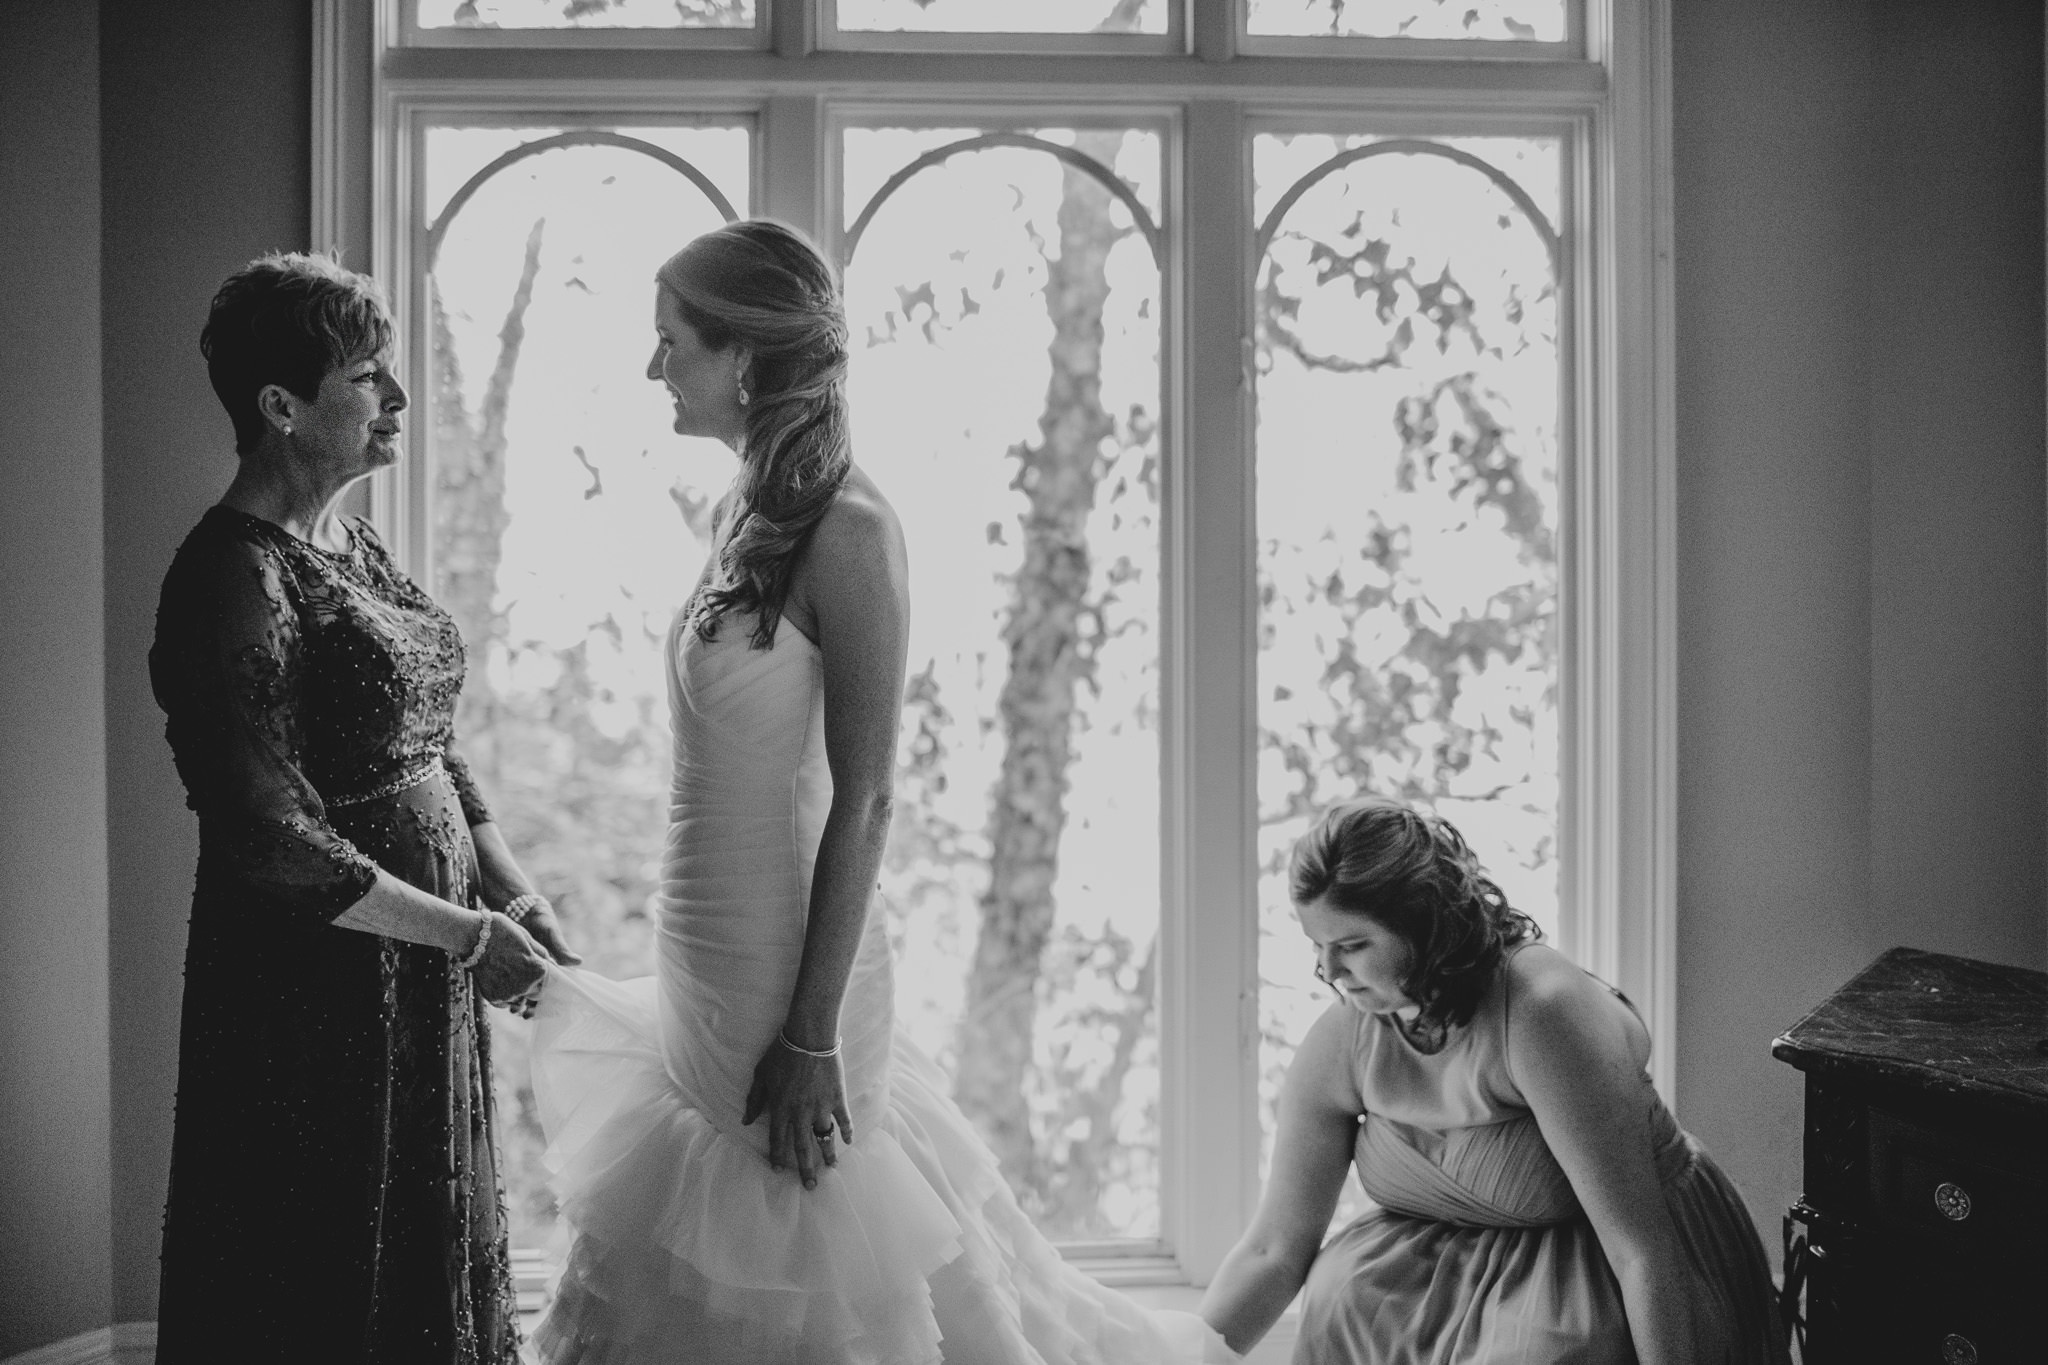 Mom & Bride share a sweet moment before her Alexander Homestead Wedding